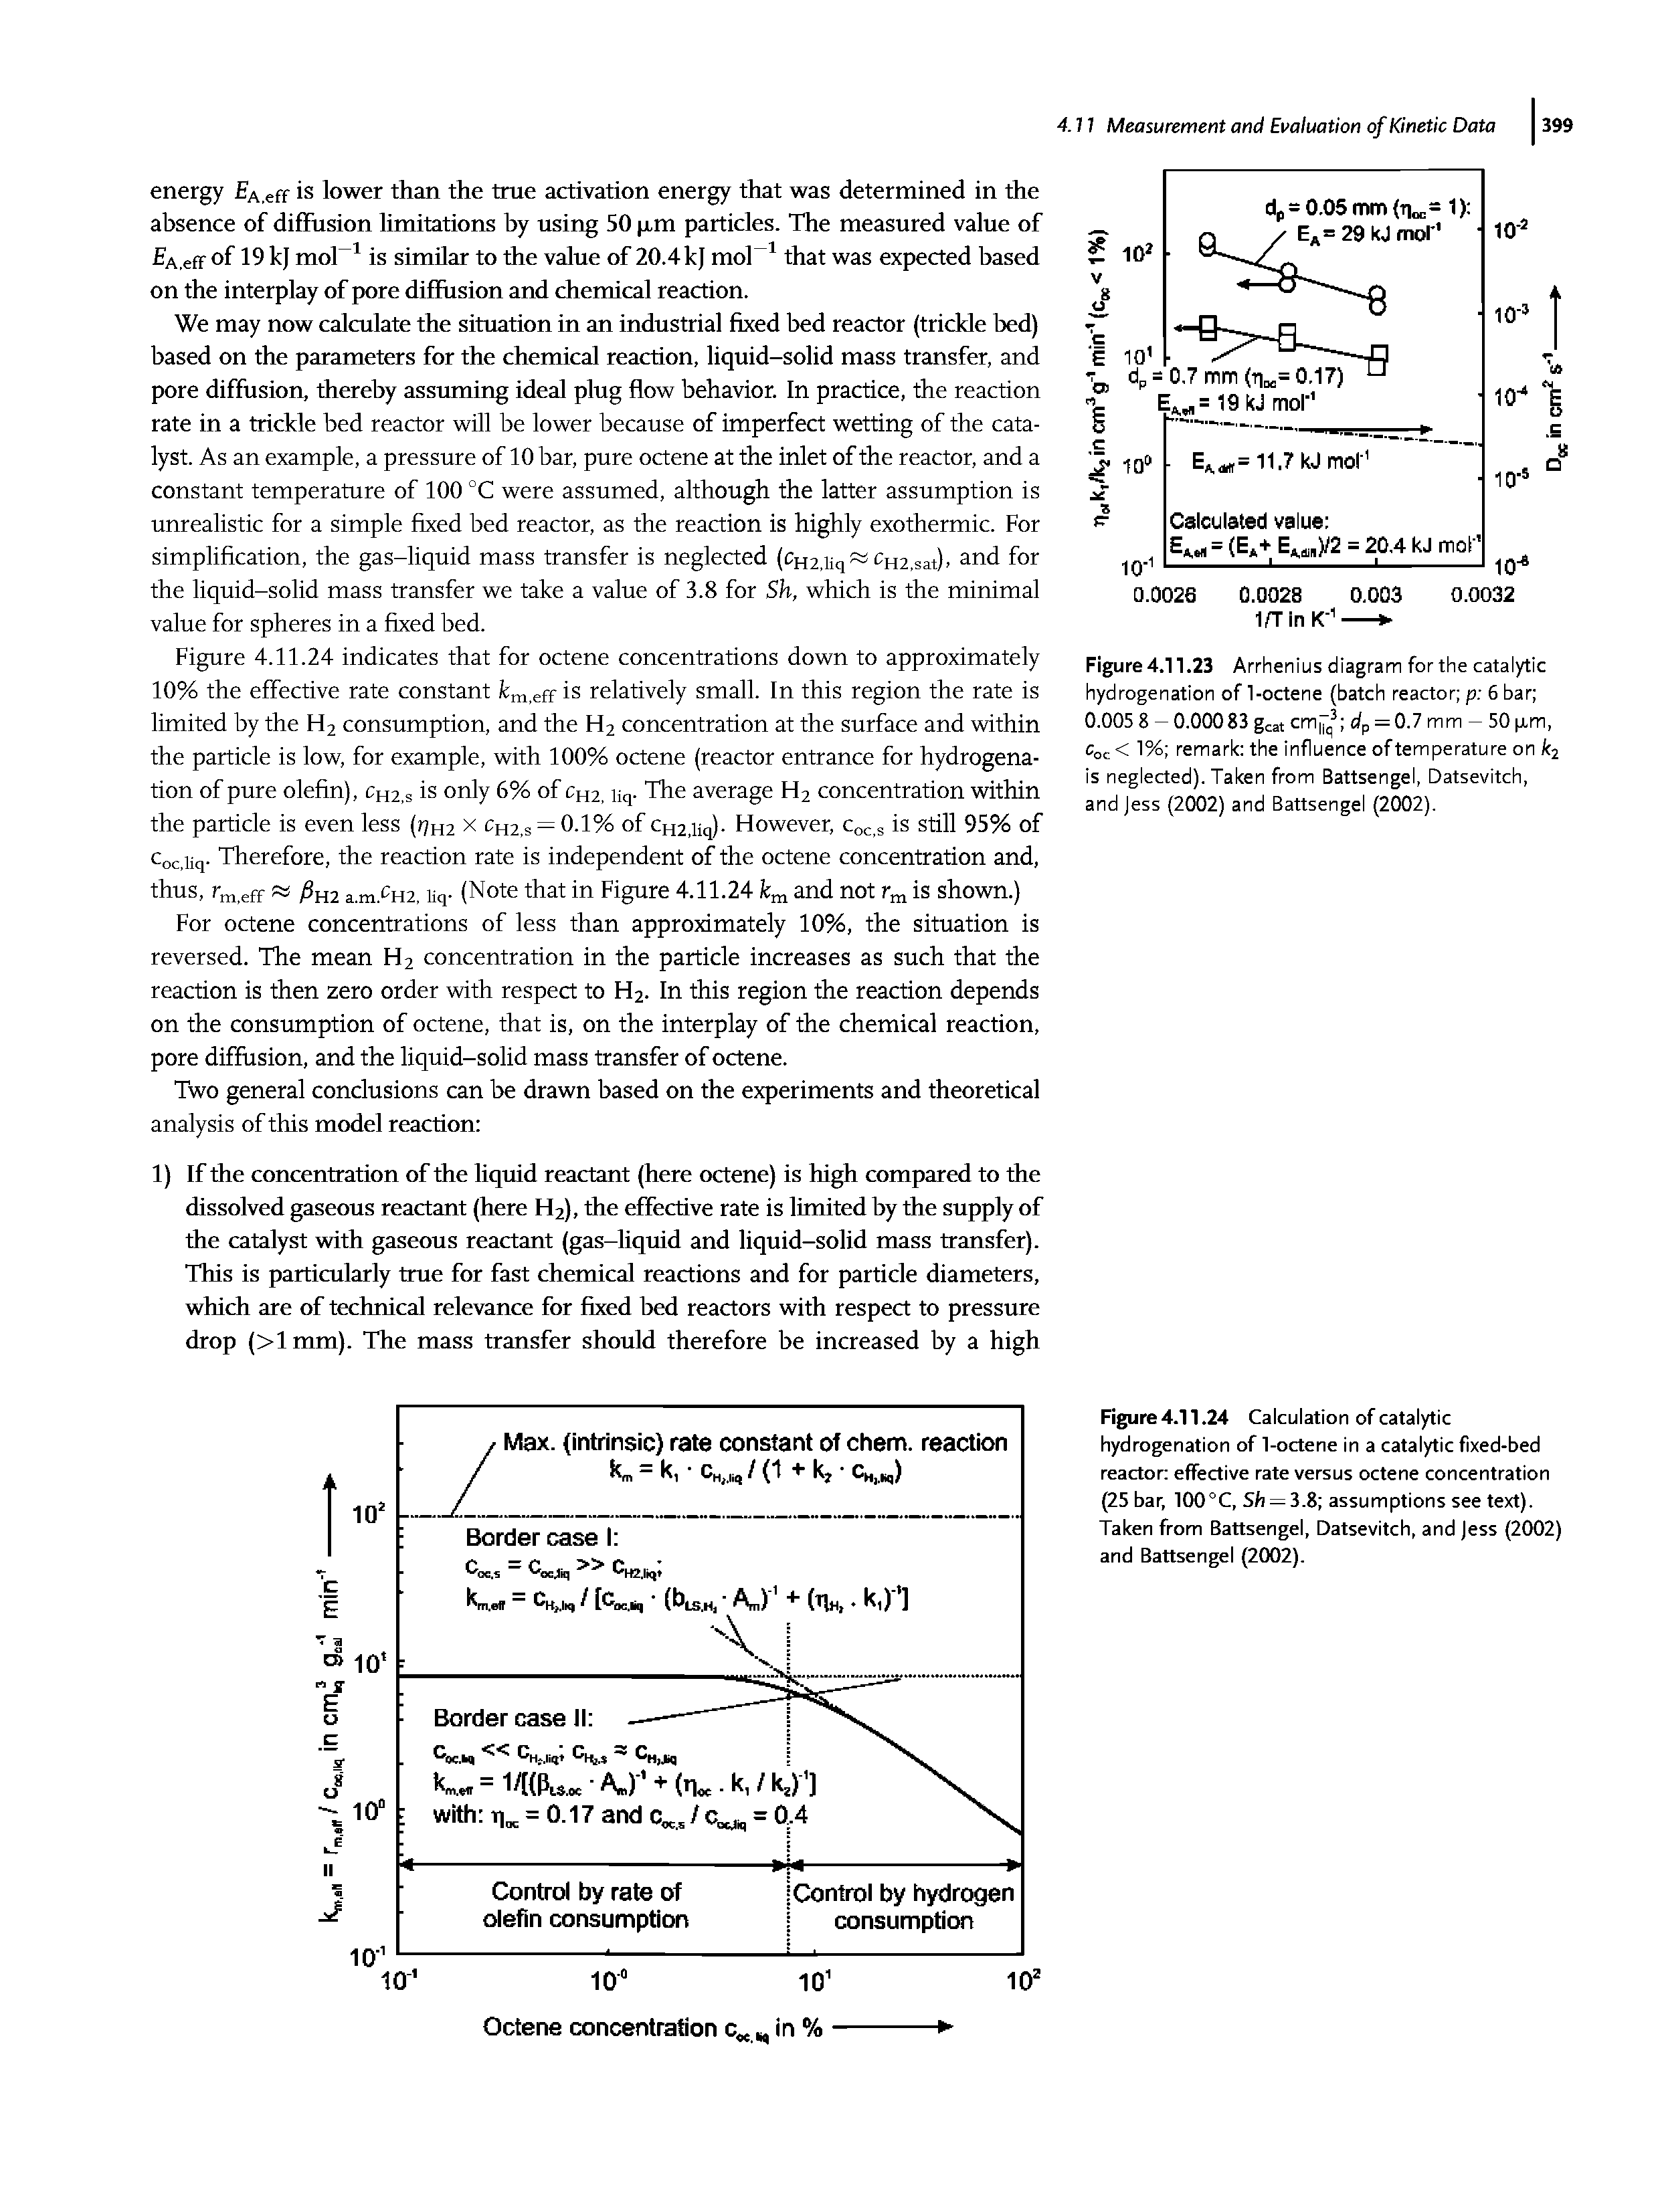 Figure 4.11.24 Caicuiation of catalytic hydrogenation of 1-octene in a catalytic fixed-bed reactor effective rate versus octene concentration (25 bar, 100°C, Sh = 3.8 assumptions see text). Taken from Battsengel, Datsevitch, and Jess (2002) and Battsengel (2002).